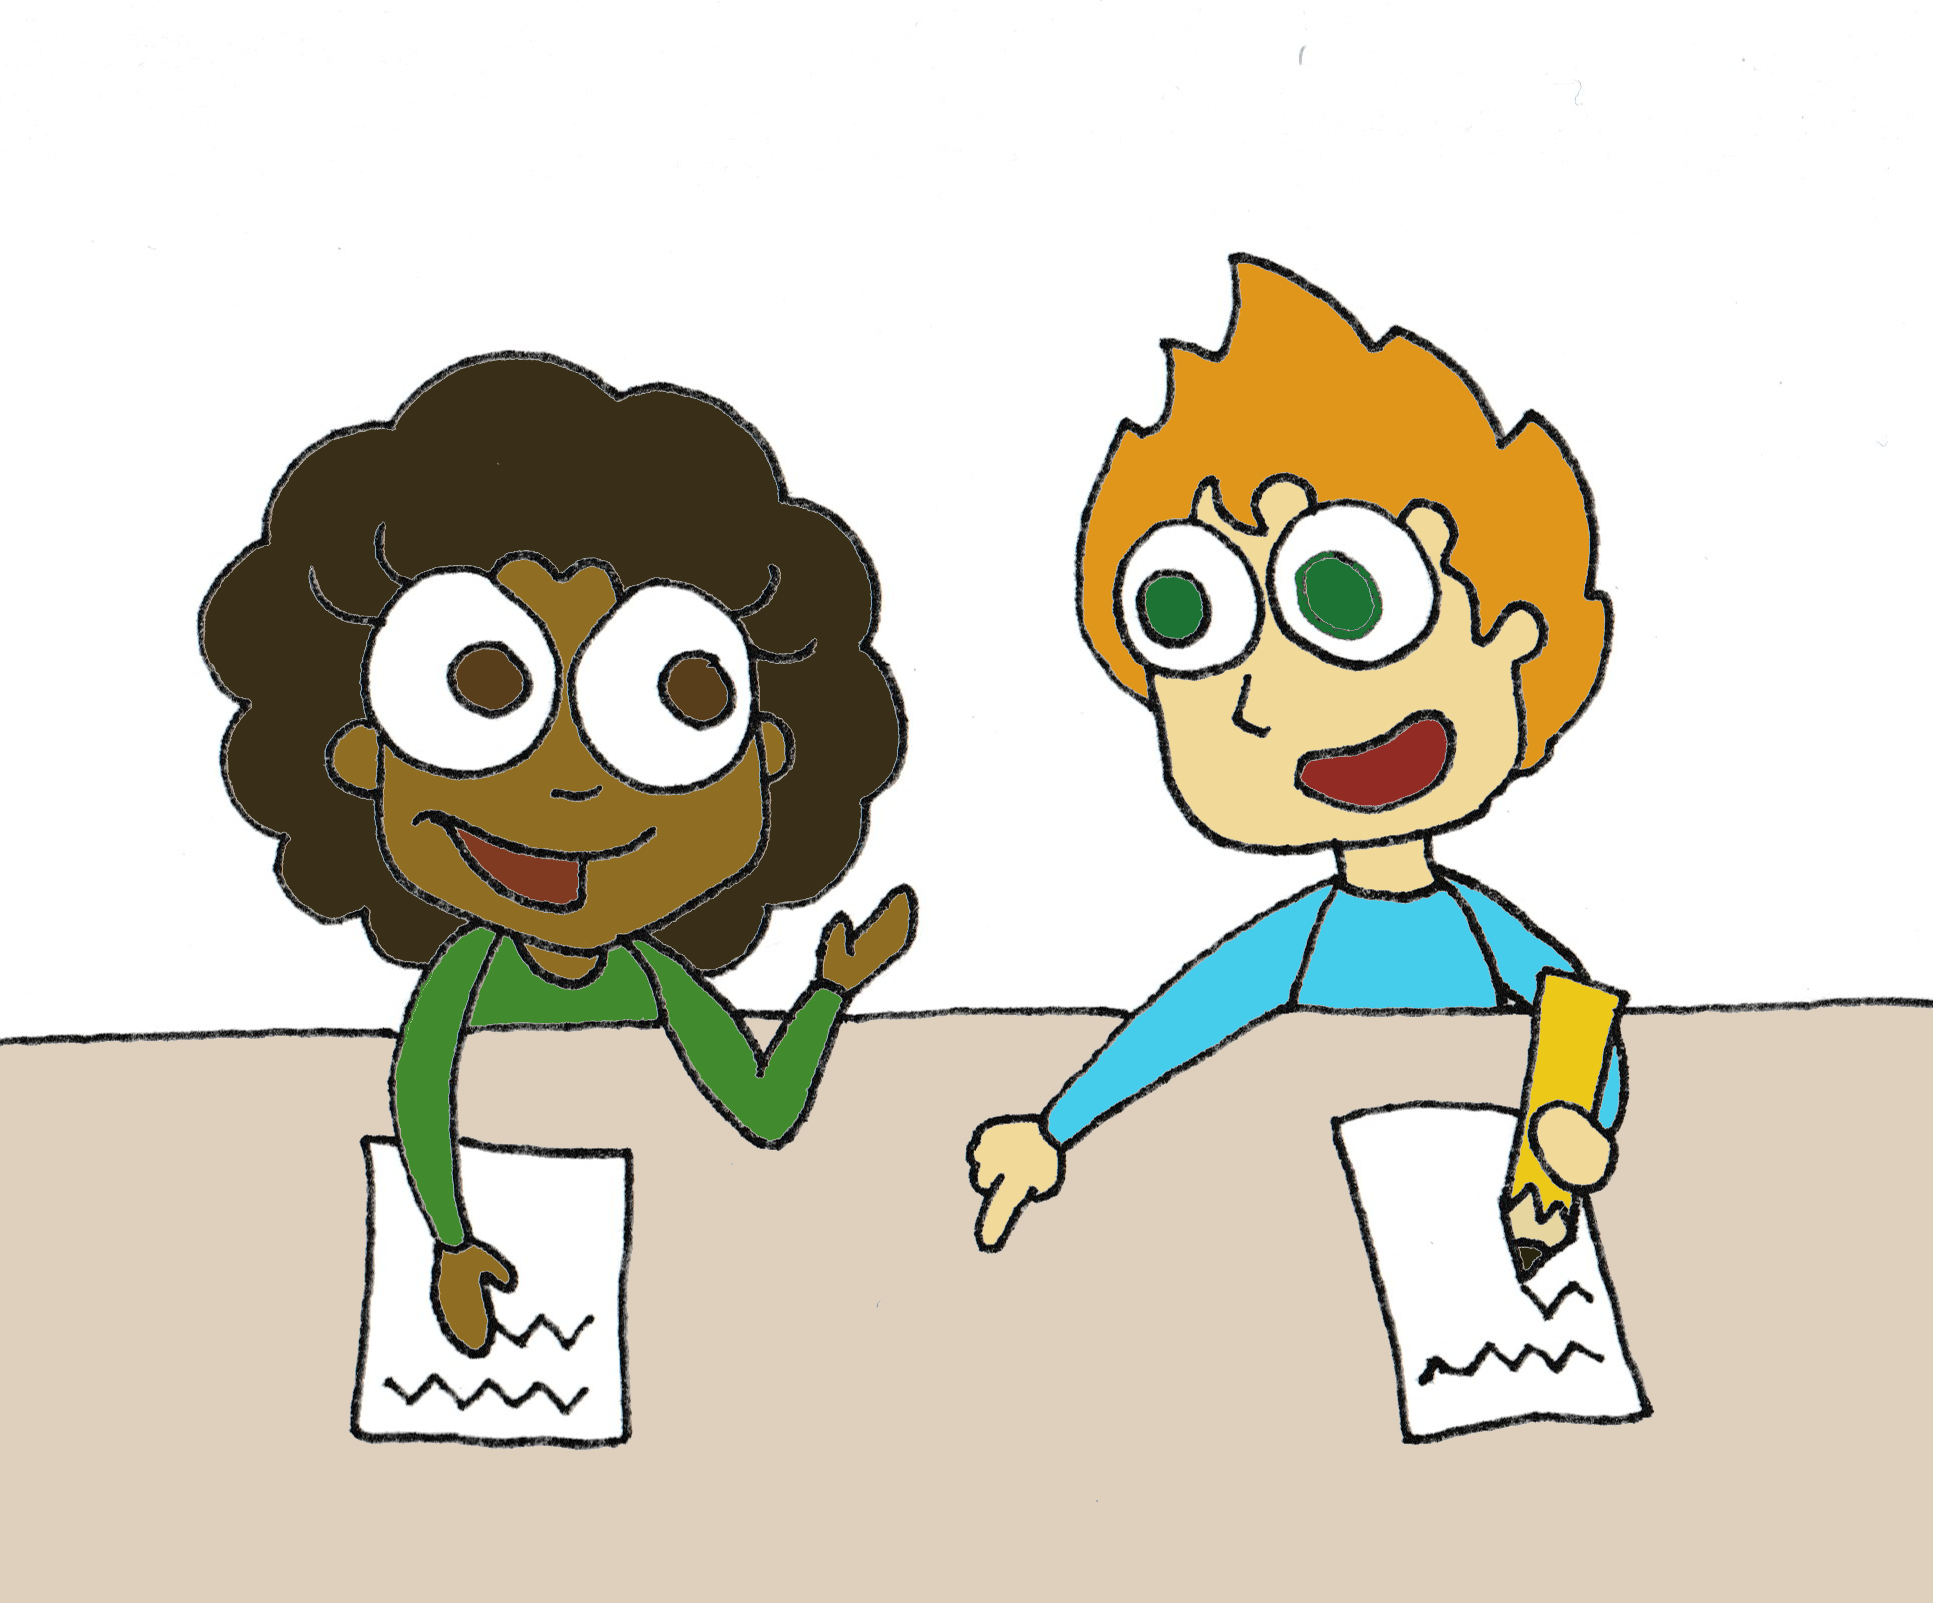 Two students sitting down with one holding a paper and talking